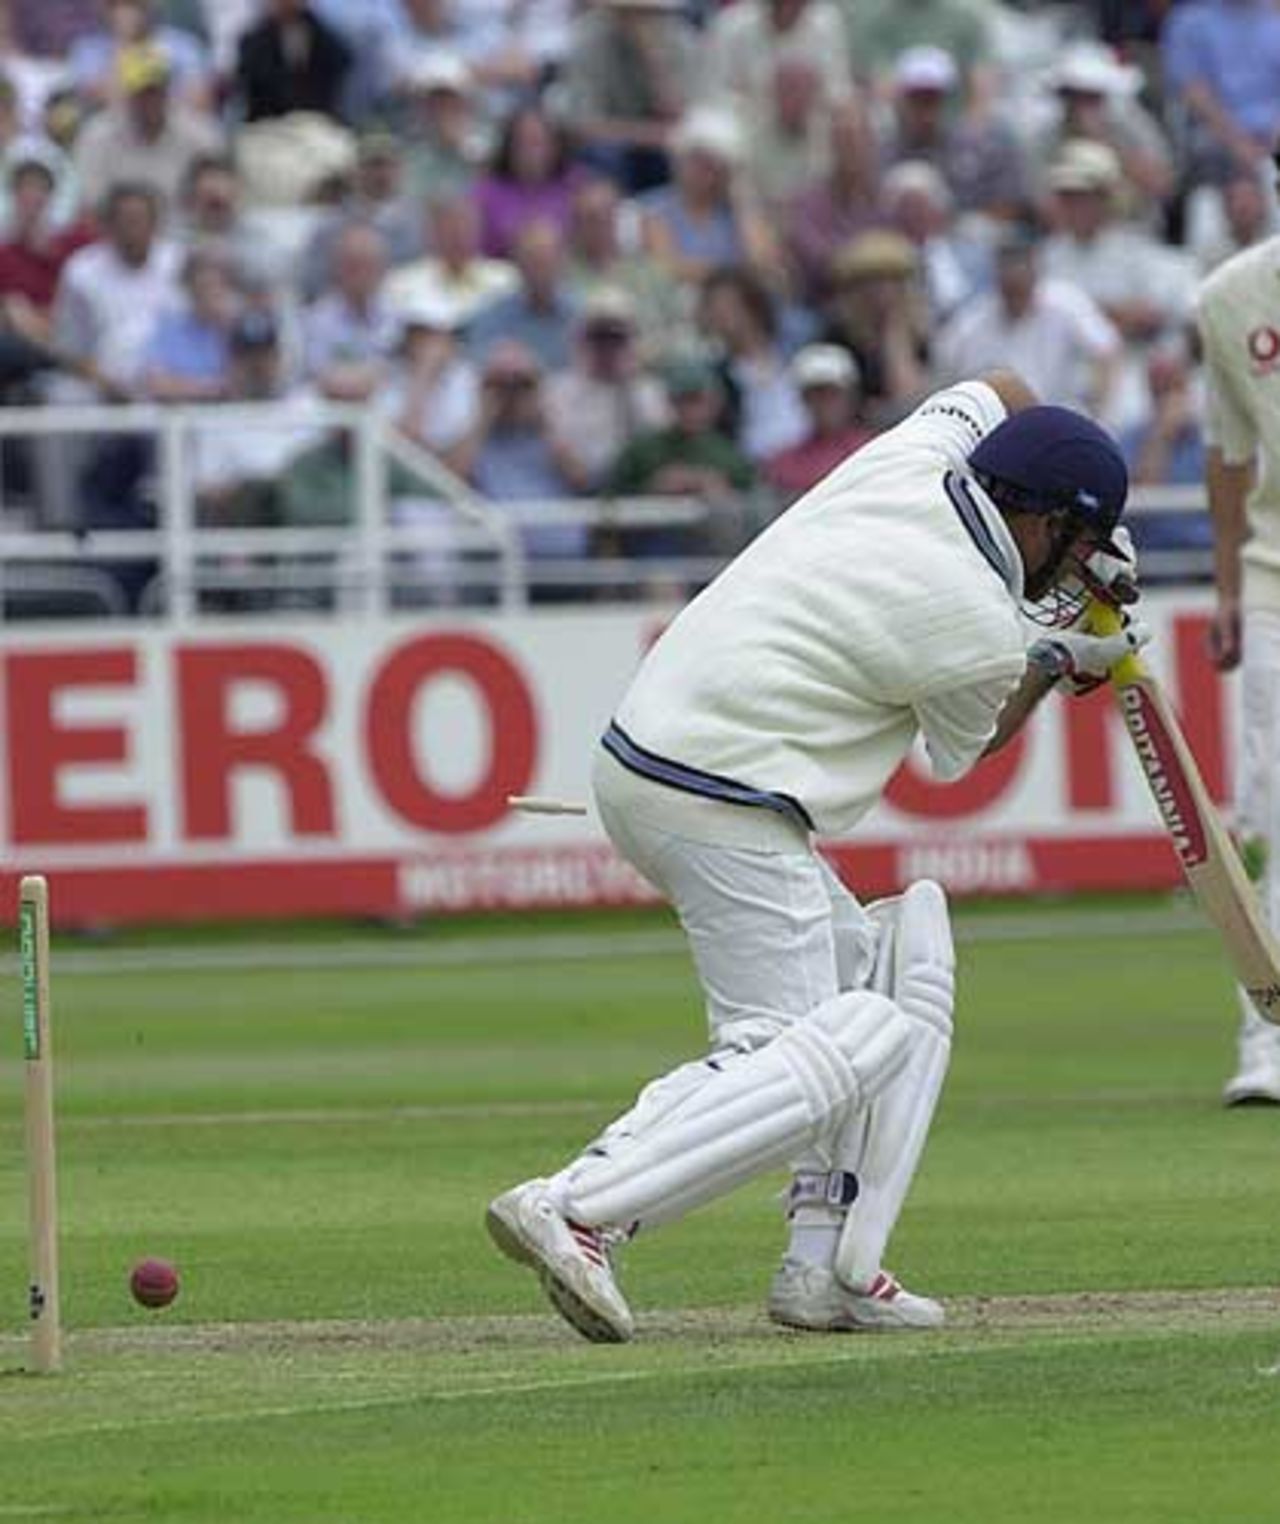 Virender Sehwag is bowled Craig White for 106, 2nd npower Test at Trent Bridge, August 2002